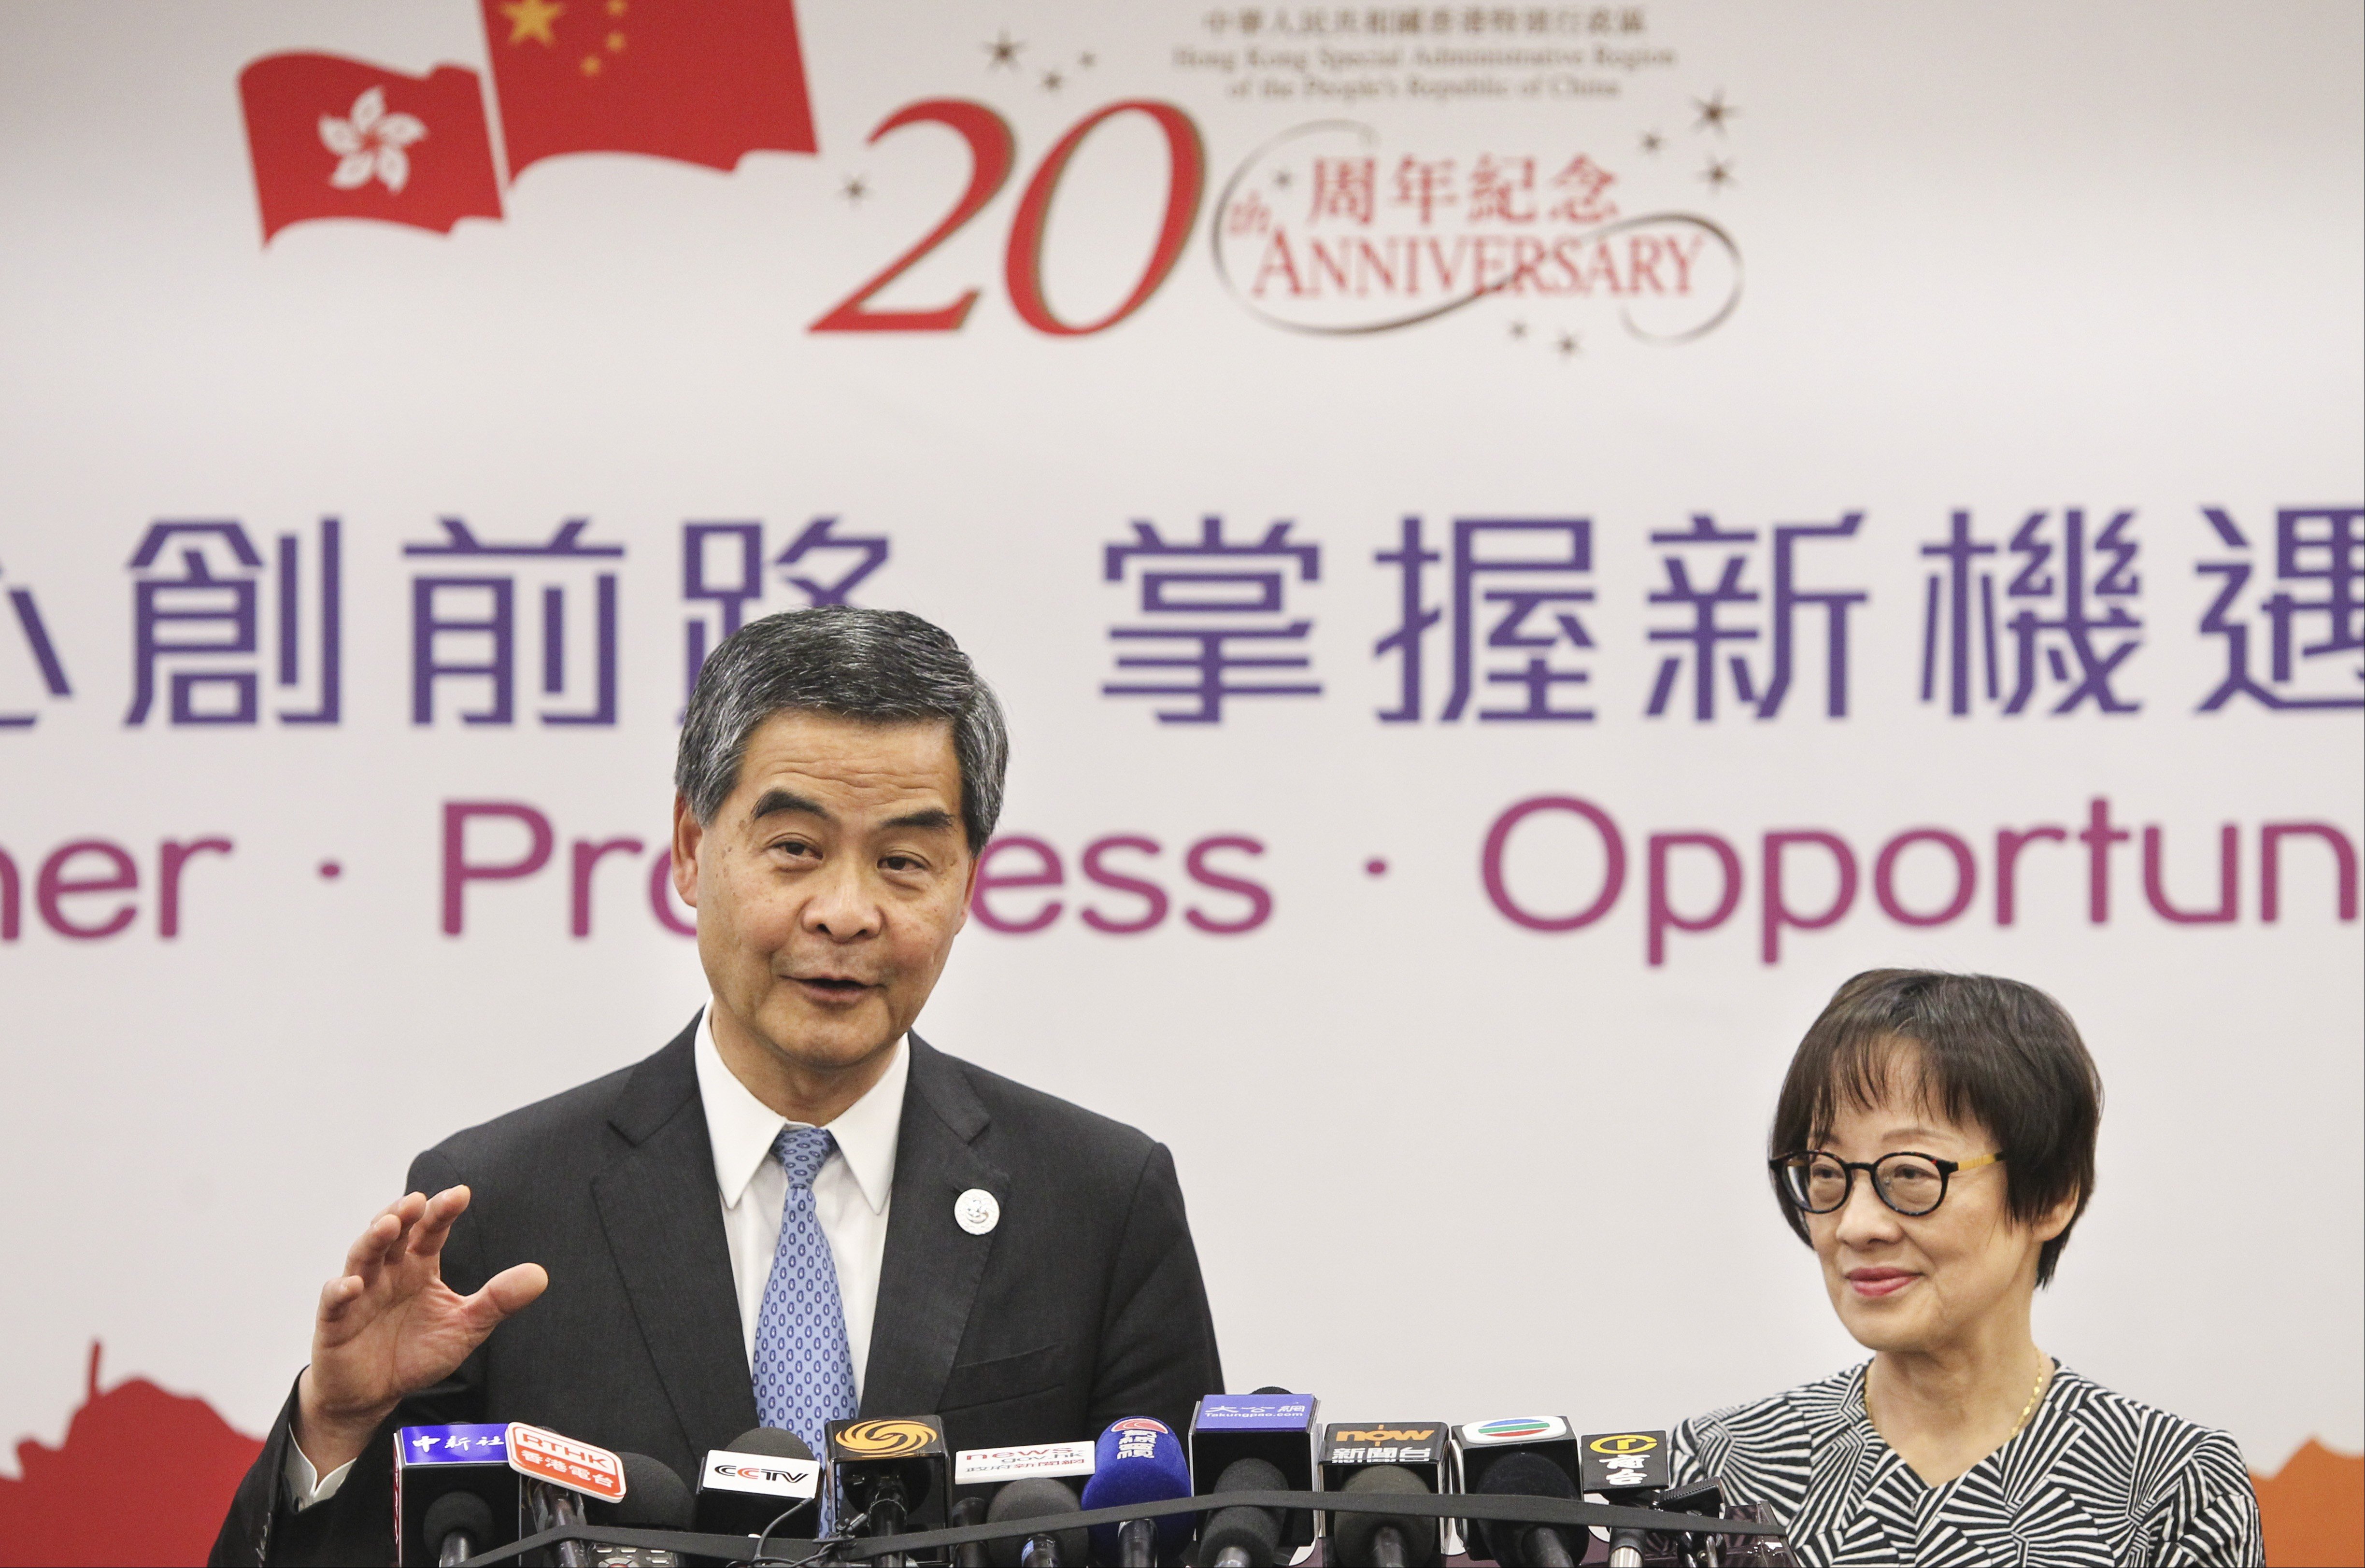 Hong Kong Chief Executive Leung Chun-ying (left) and Yvonne Choi Ying-pik, the city’s commissioner for the ‘Belt and Road Initiative’, were part of a 30-strong delegation at the summit in Beijing. Photo: Simon Song